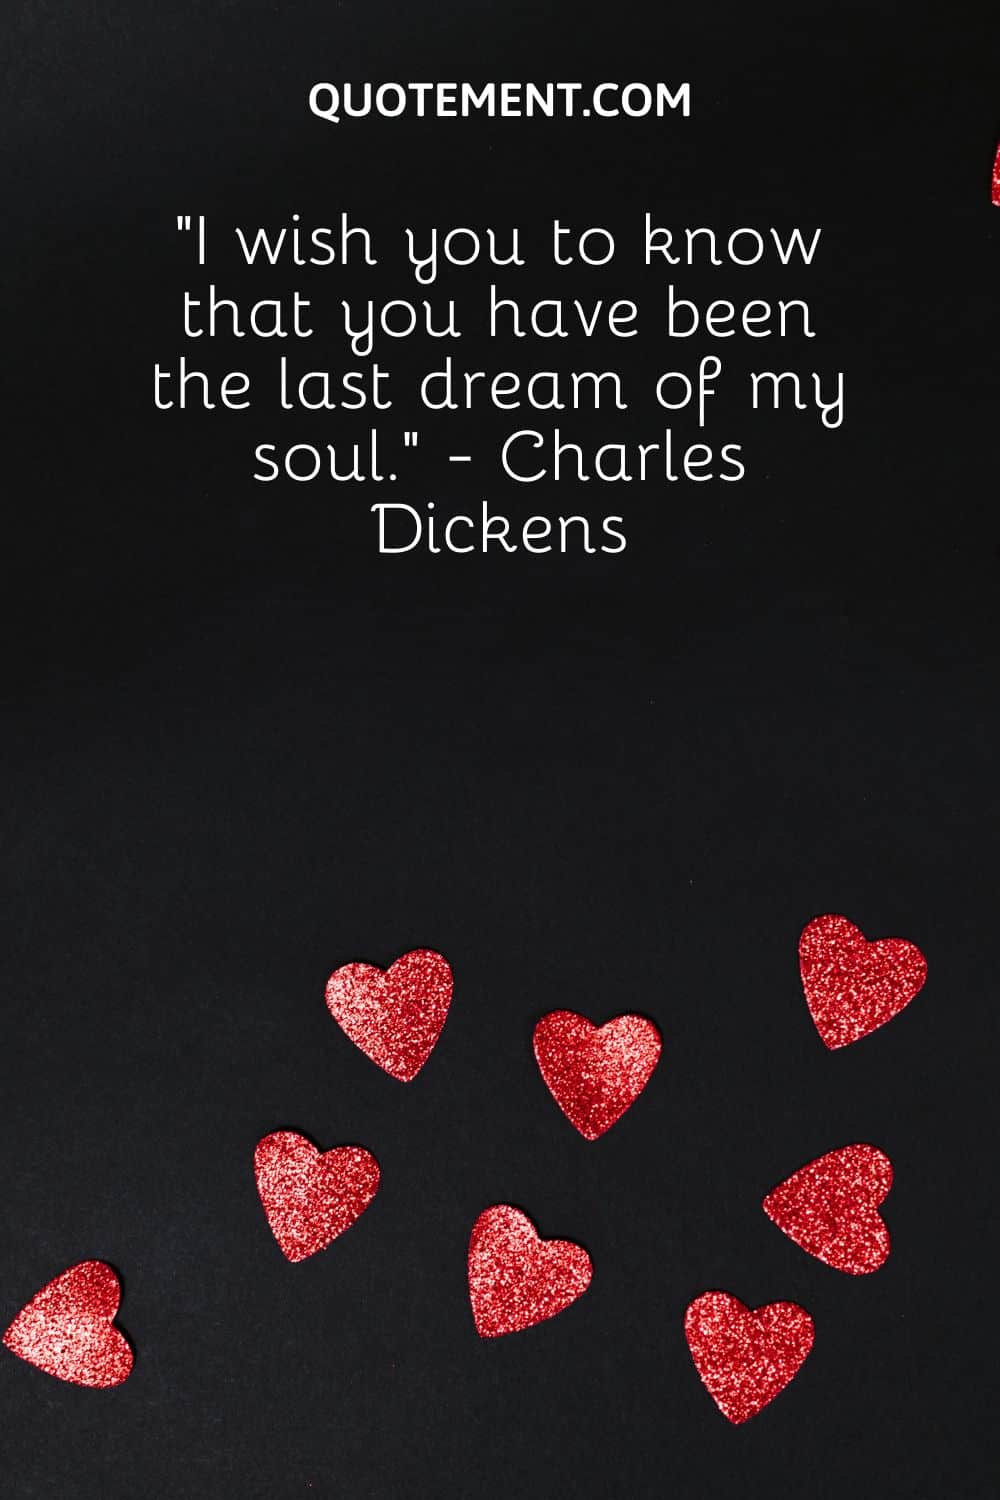 “I wish you to know that you have been the last dream of my soul.” - Charles Dickens